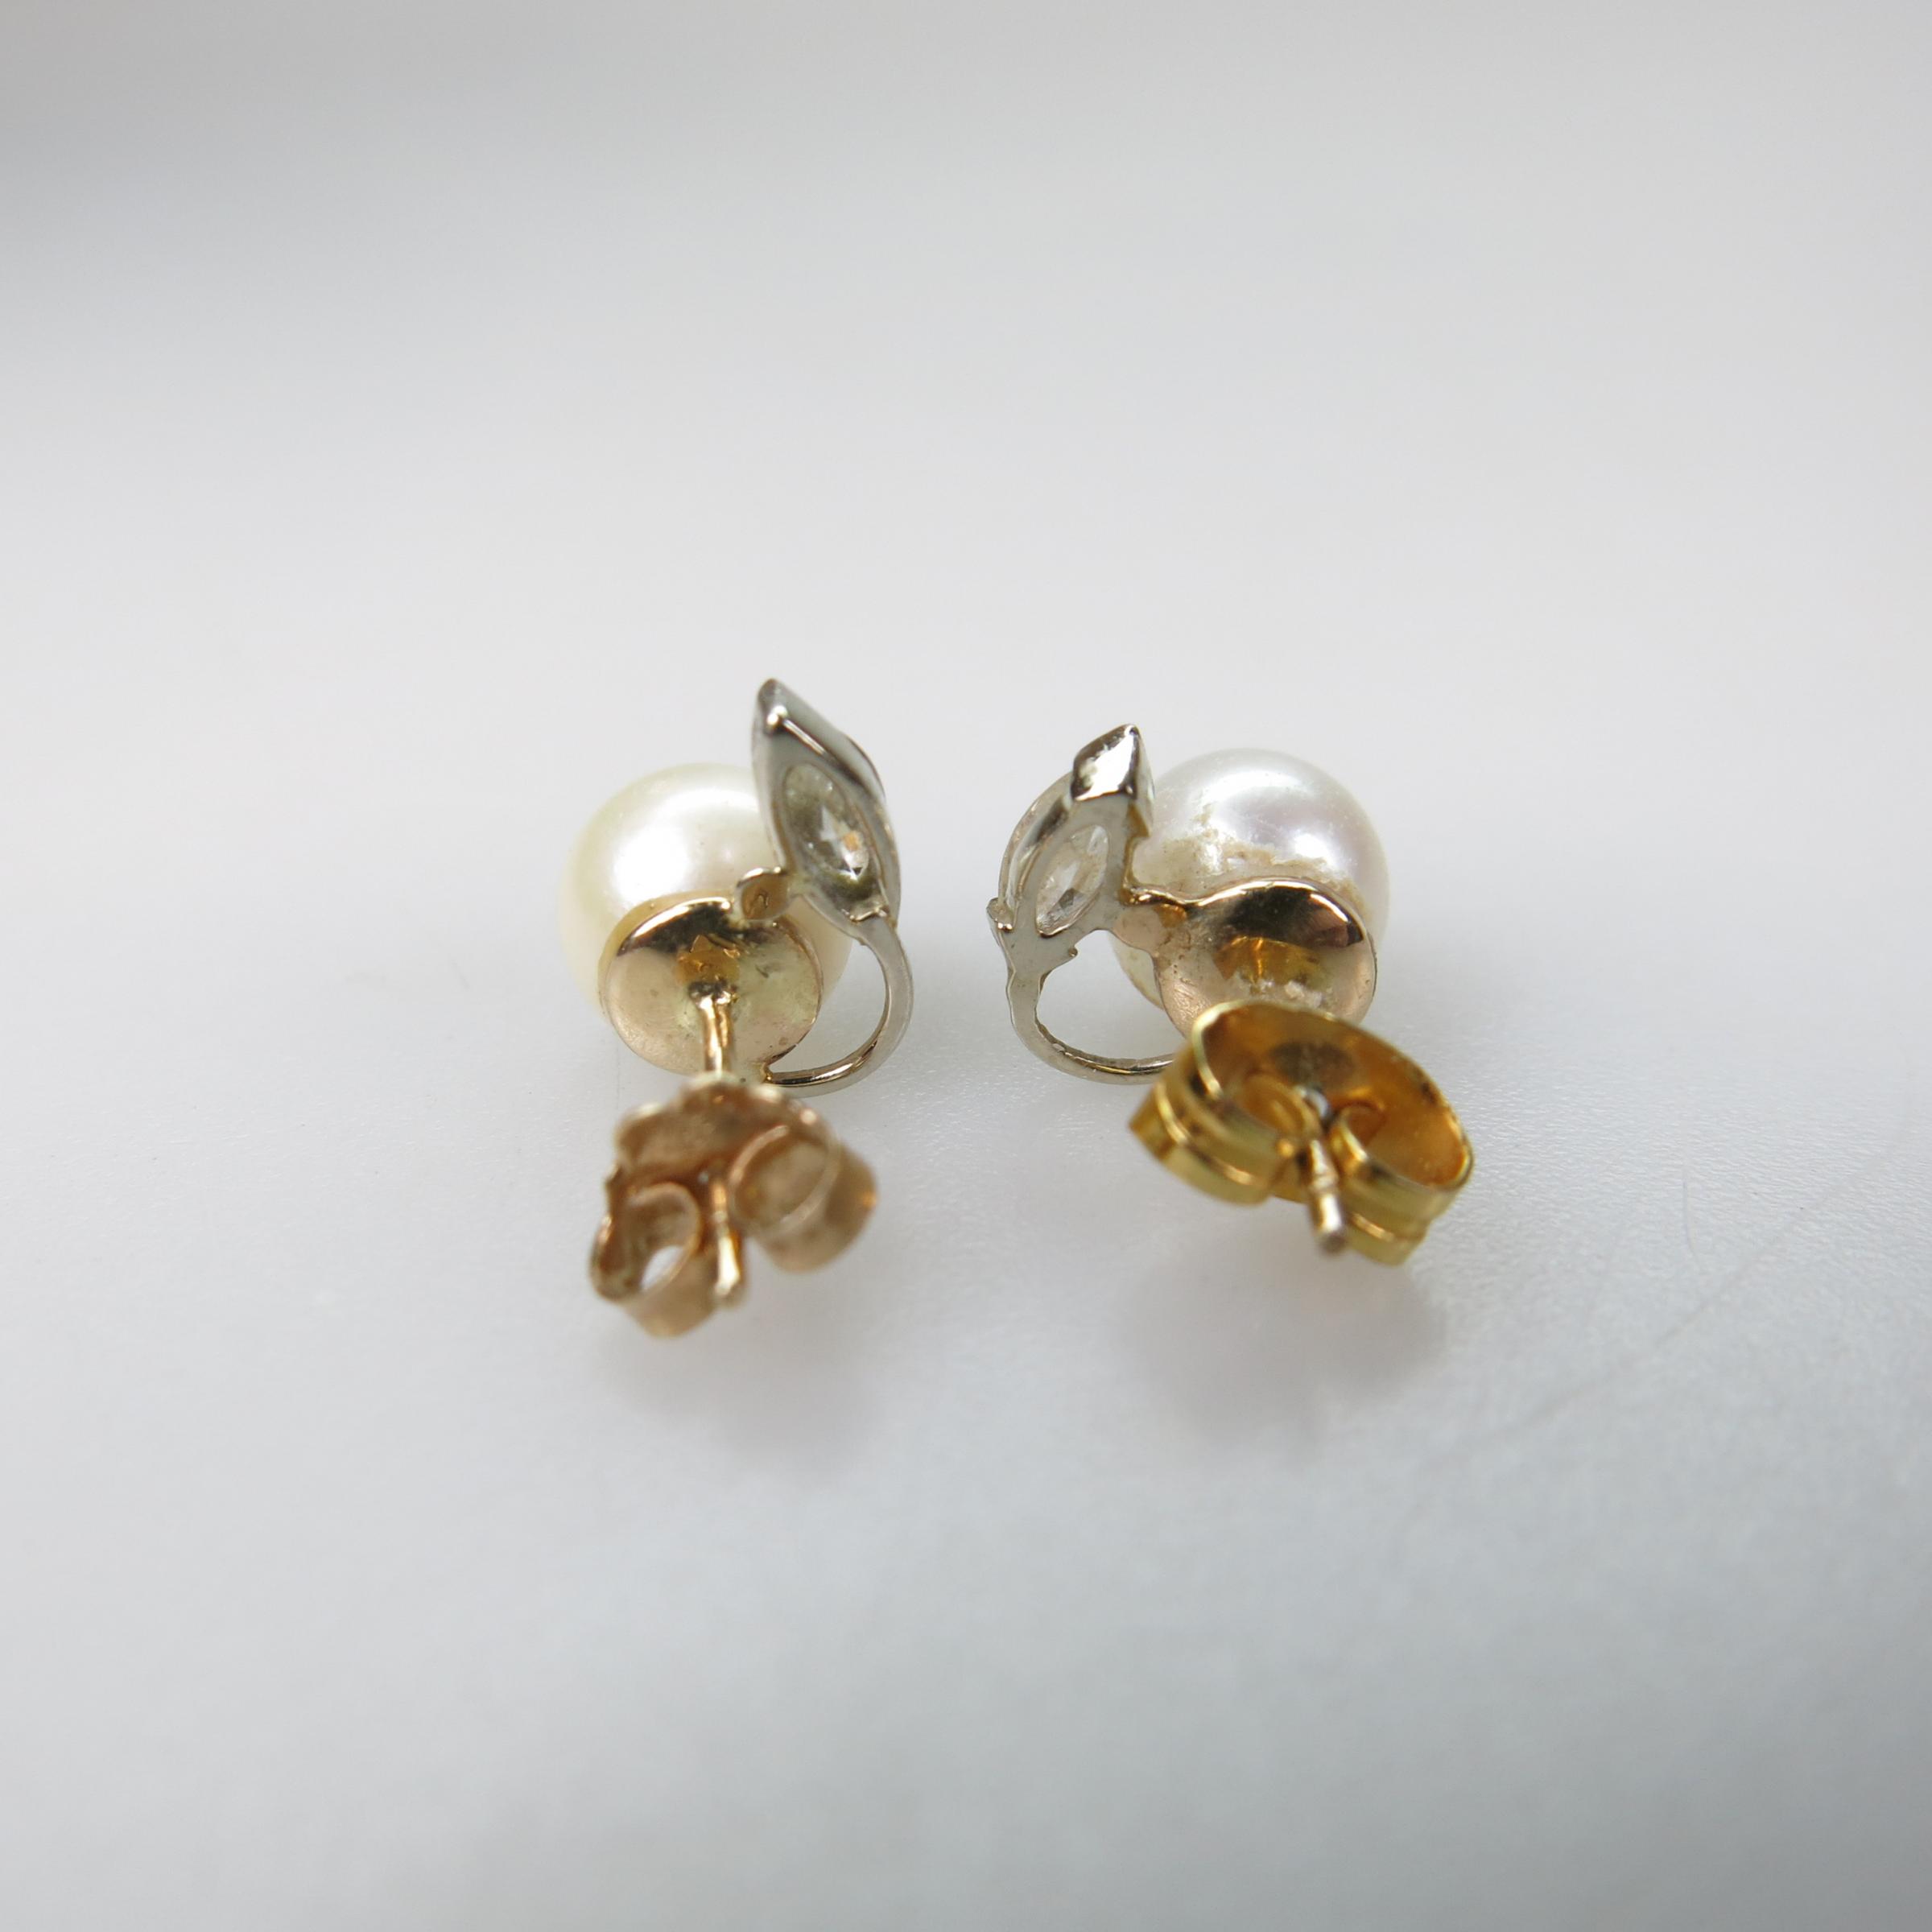 Pair Of 10k Yellow And White Gold Stud Earrings